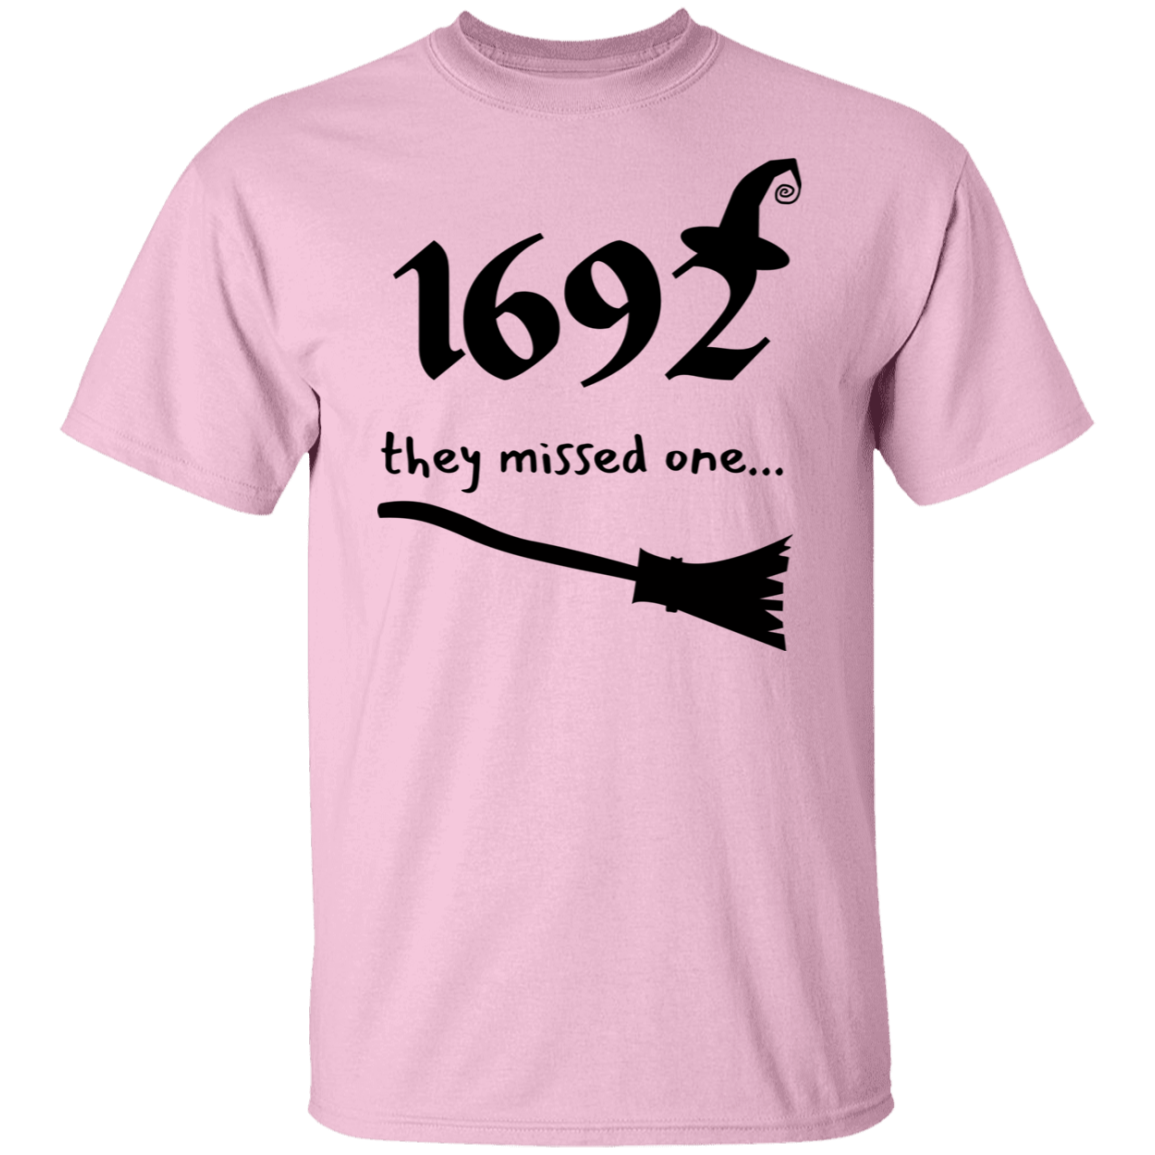 1692 they missed one.... T-shirt